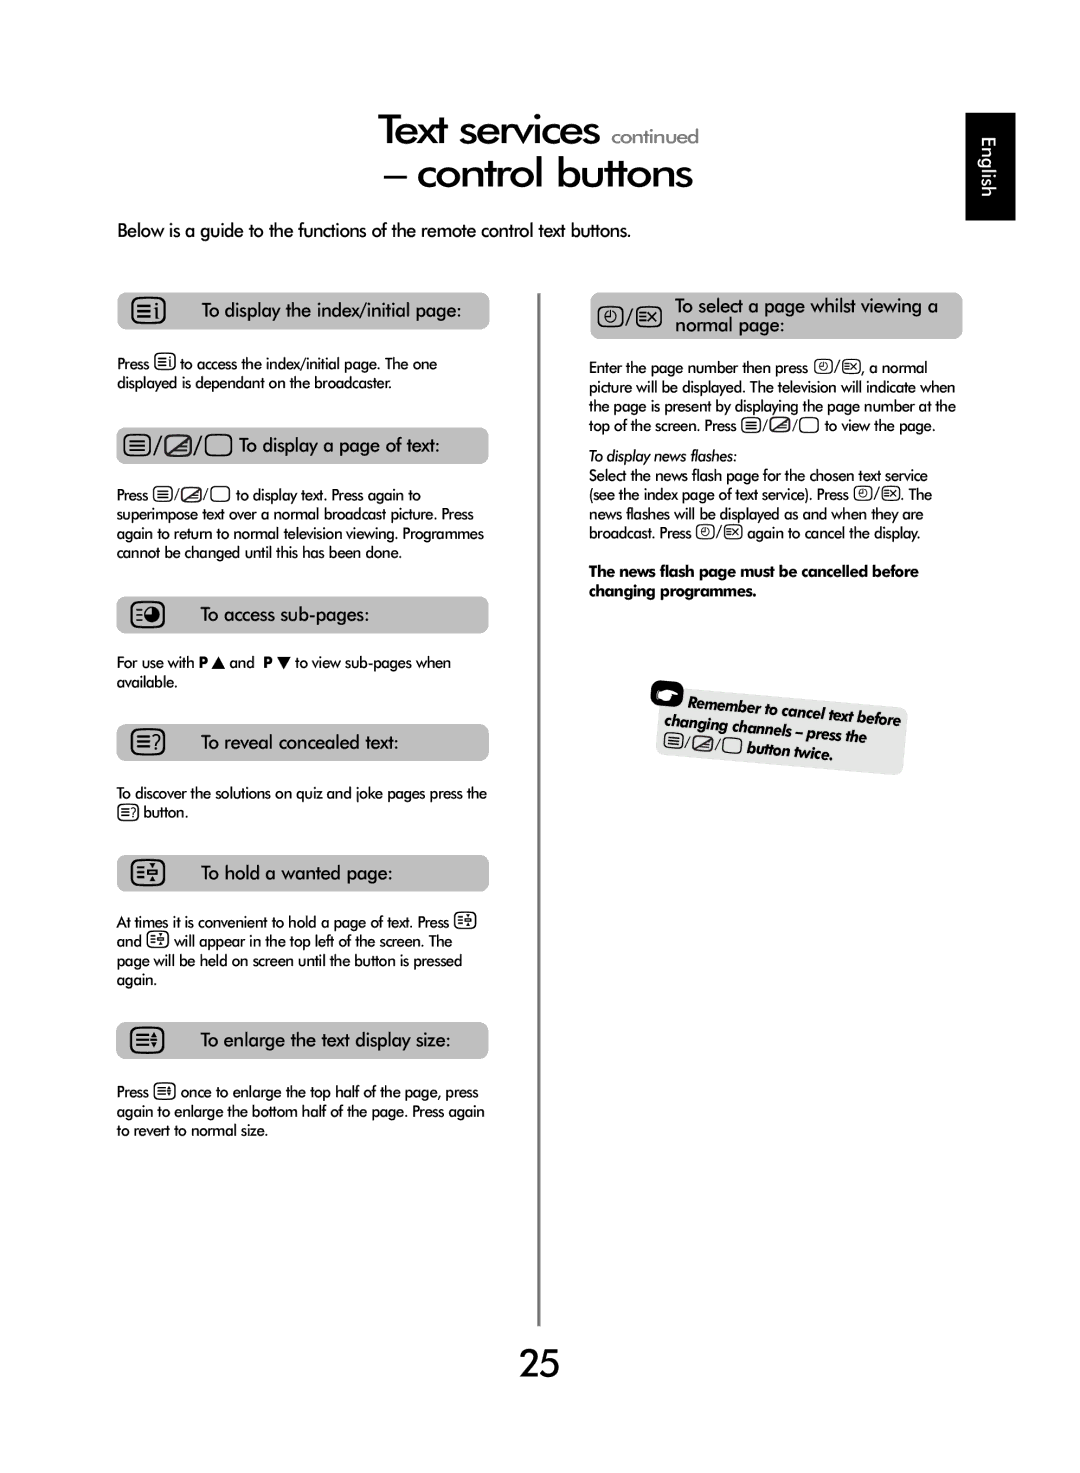 SRS Labs WL66 owner manual Text services Control buttons, For use with P fand P eto view sub-pages when available 